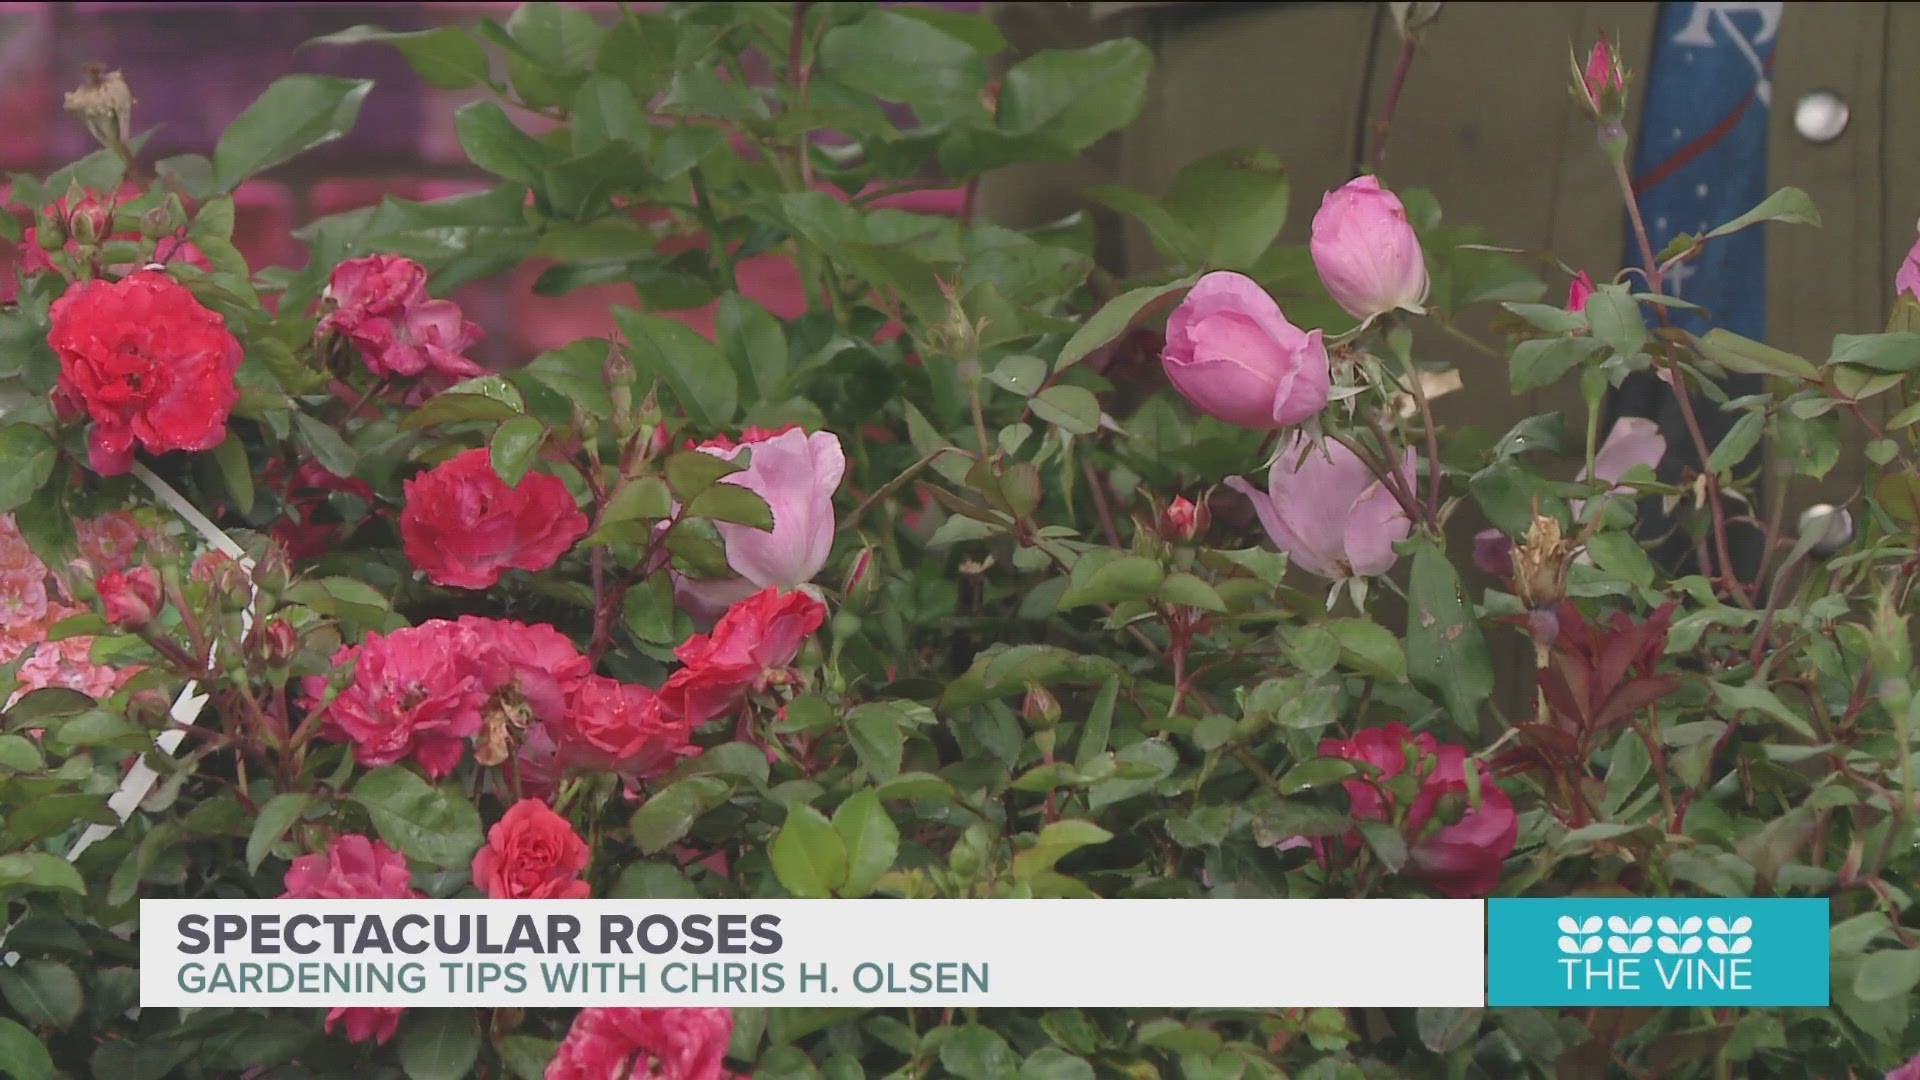 Chris H. Olsen is telling us how to make your roses flourish this spring.